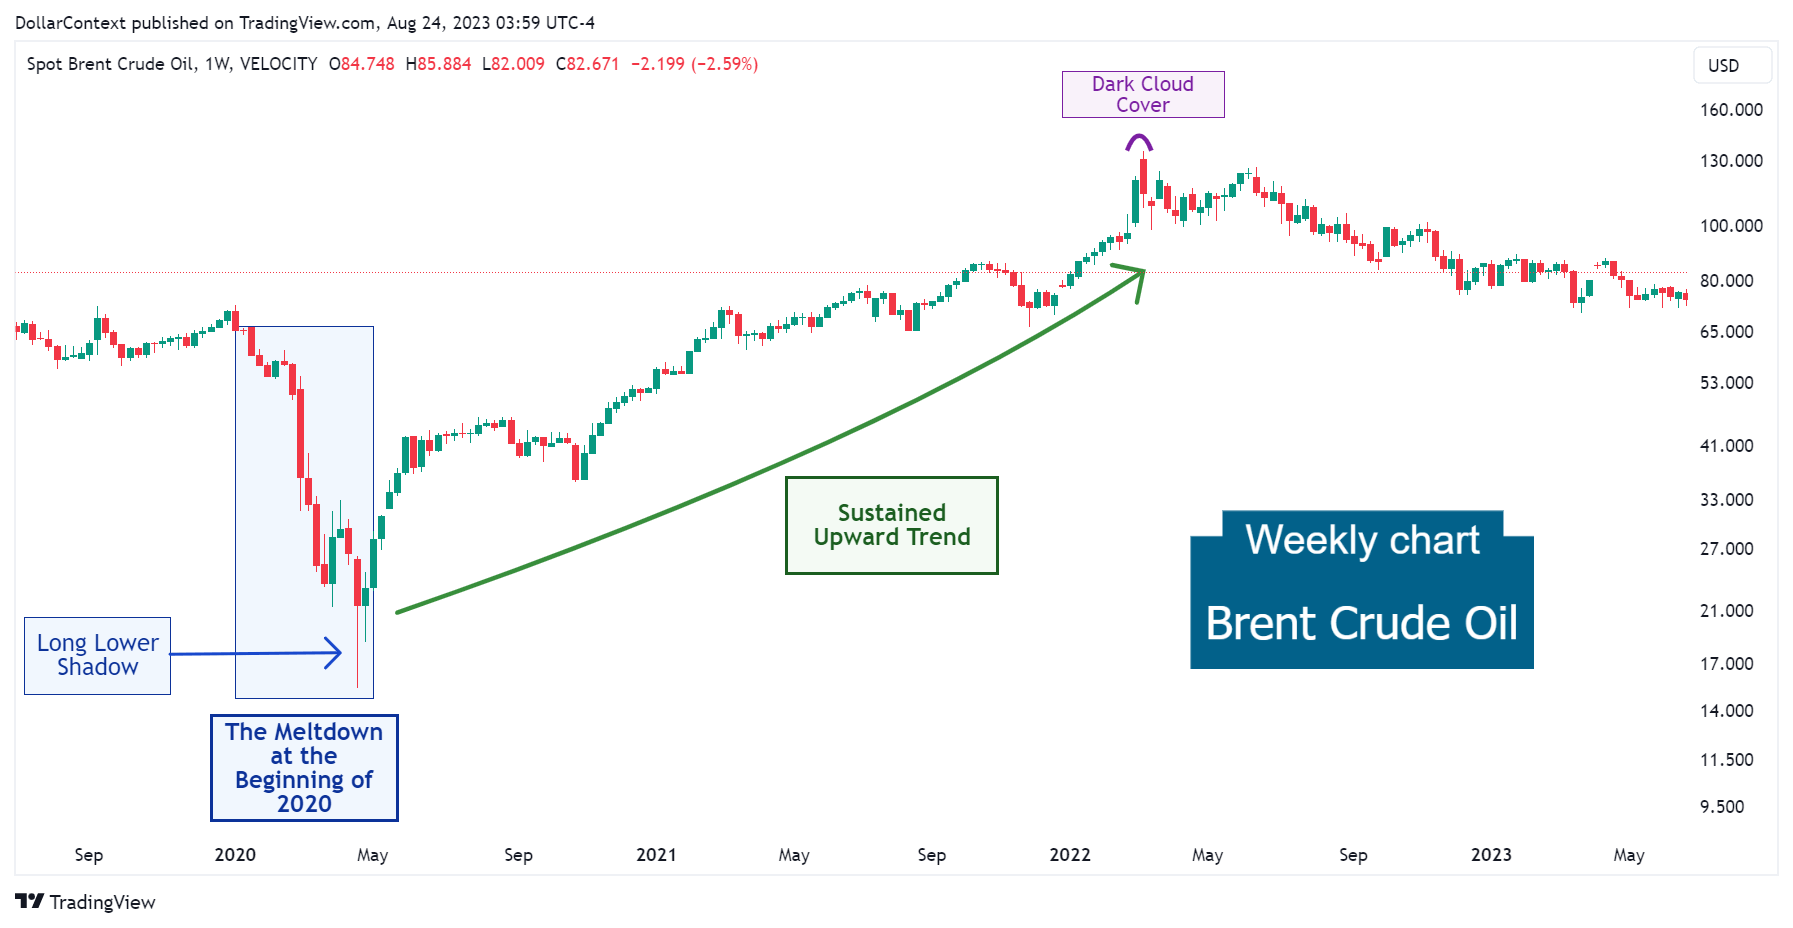 Brent Crude Oil: Uptrend After the Pandemic (Weekly Chart)